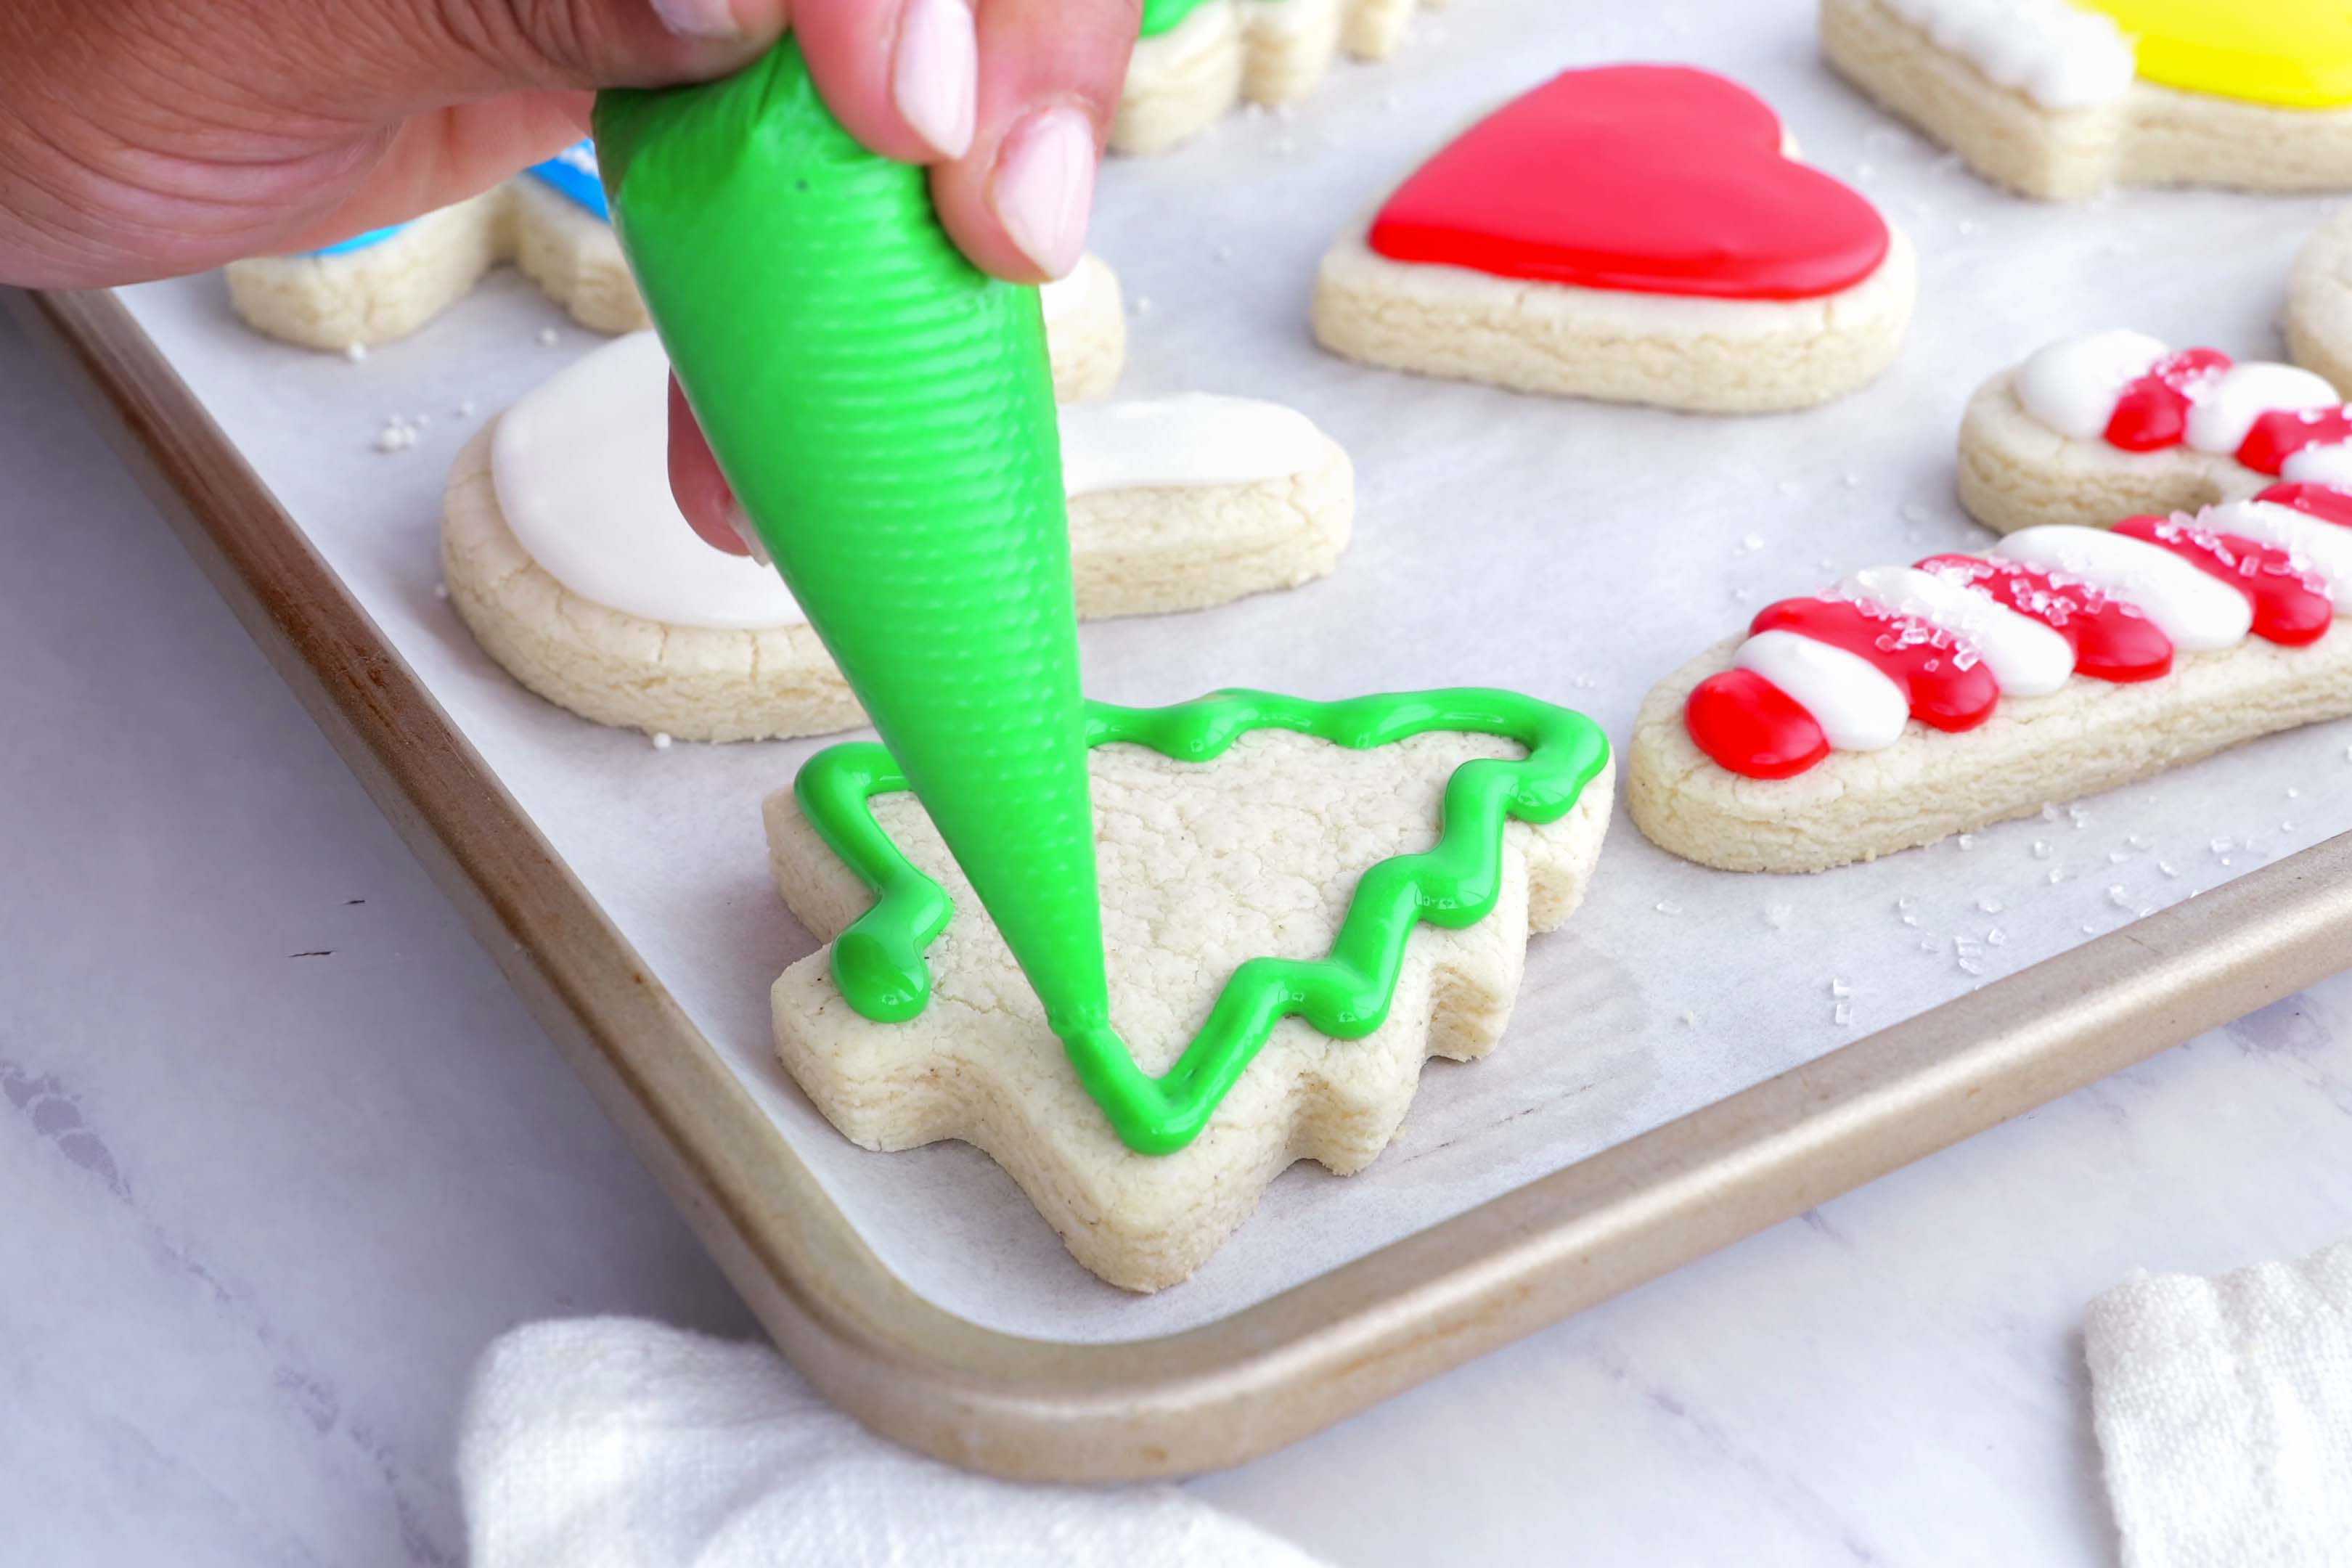 A hand pipes icing onto a cookie.